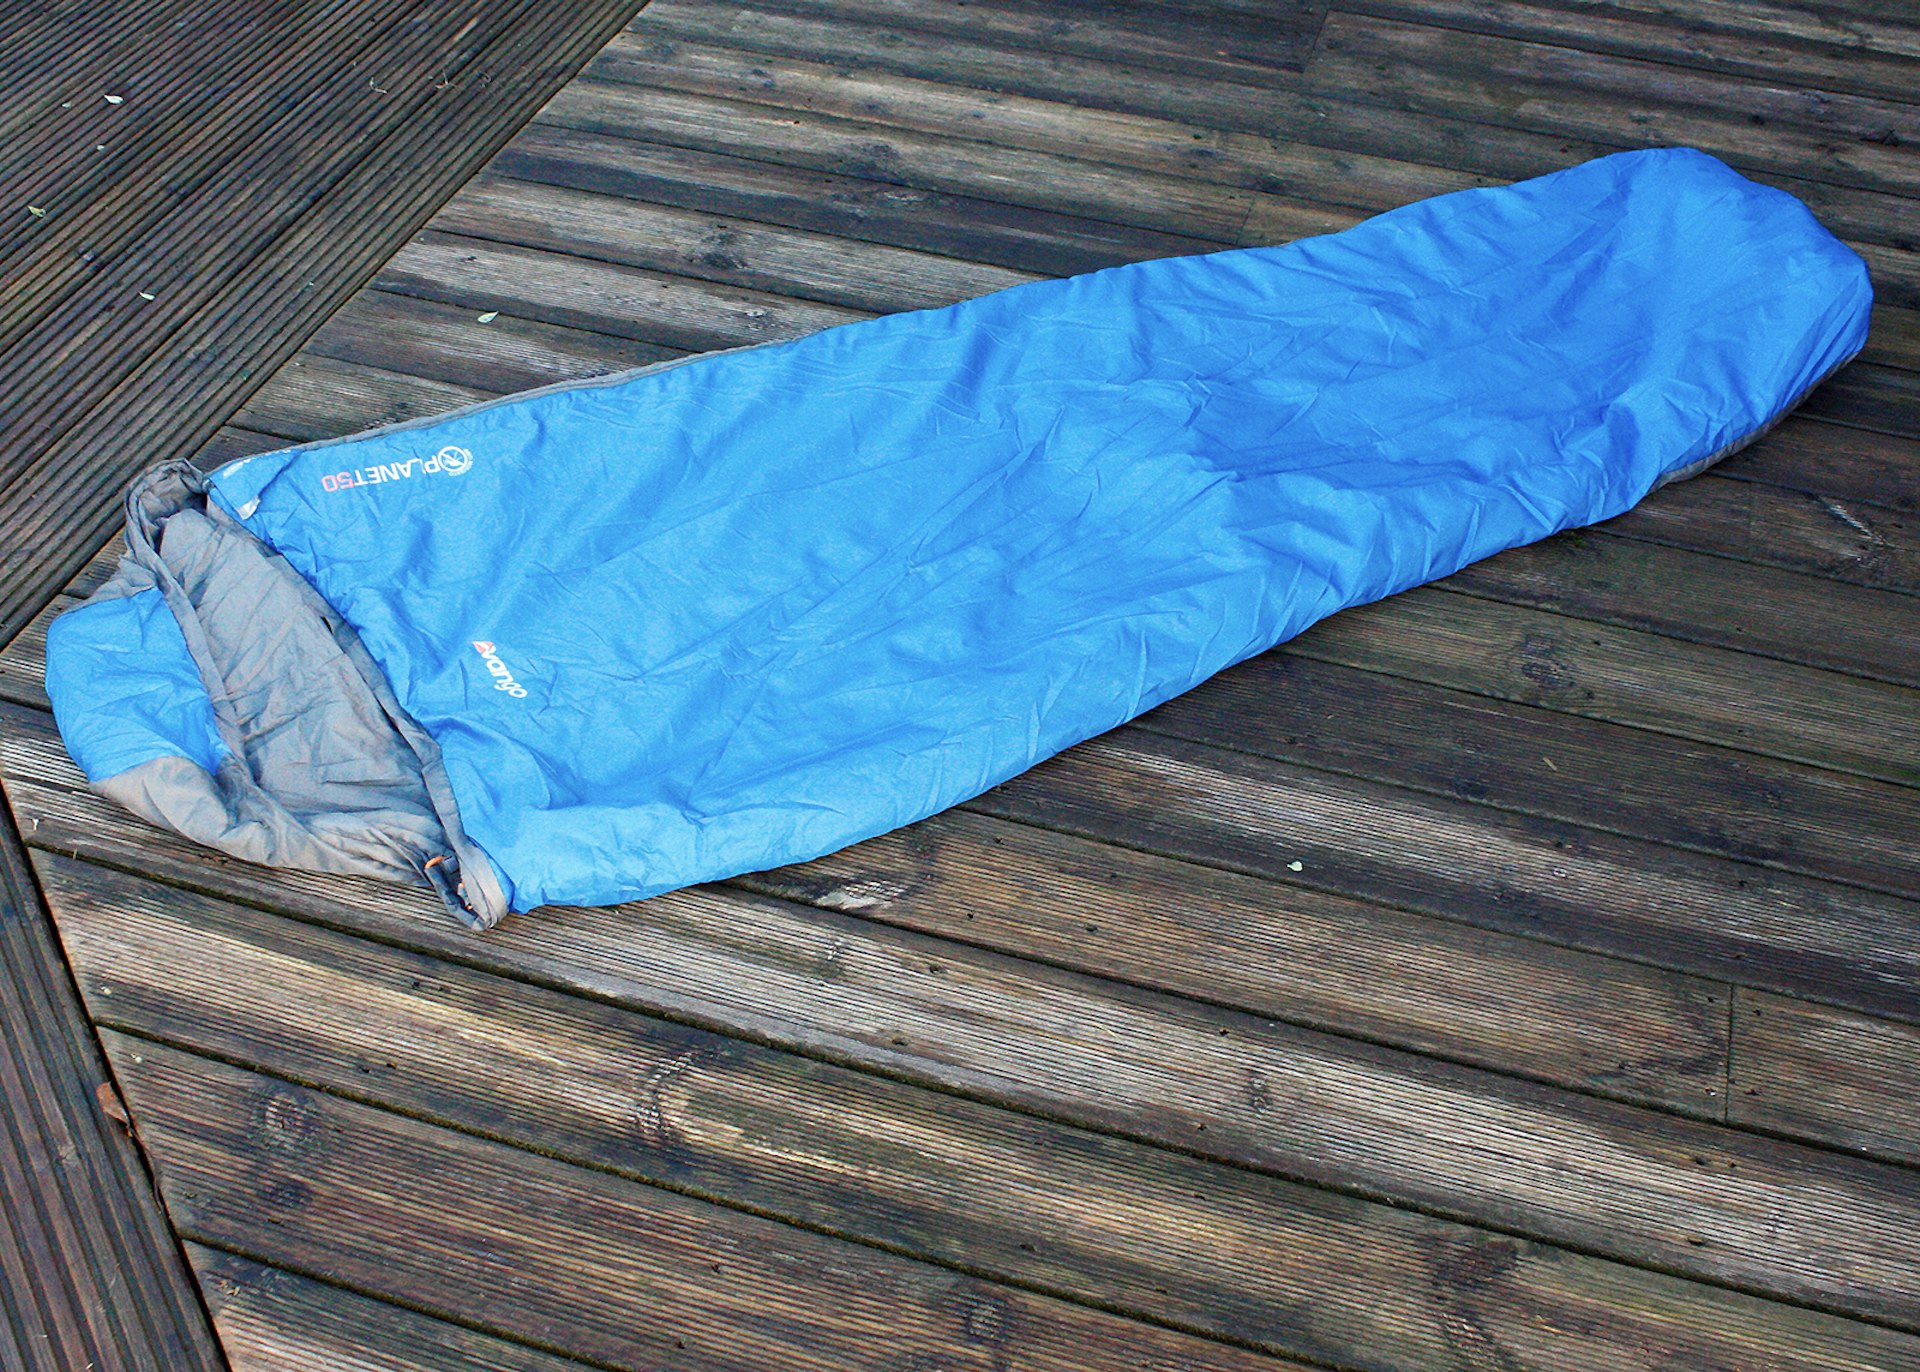 For cool nights in warm climates the Vango Planet 50 sleeping bag is ideal © David Else / Lonely Planet